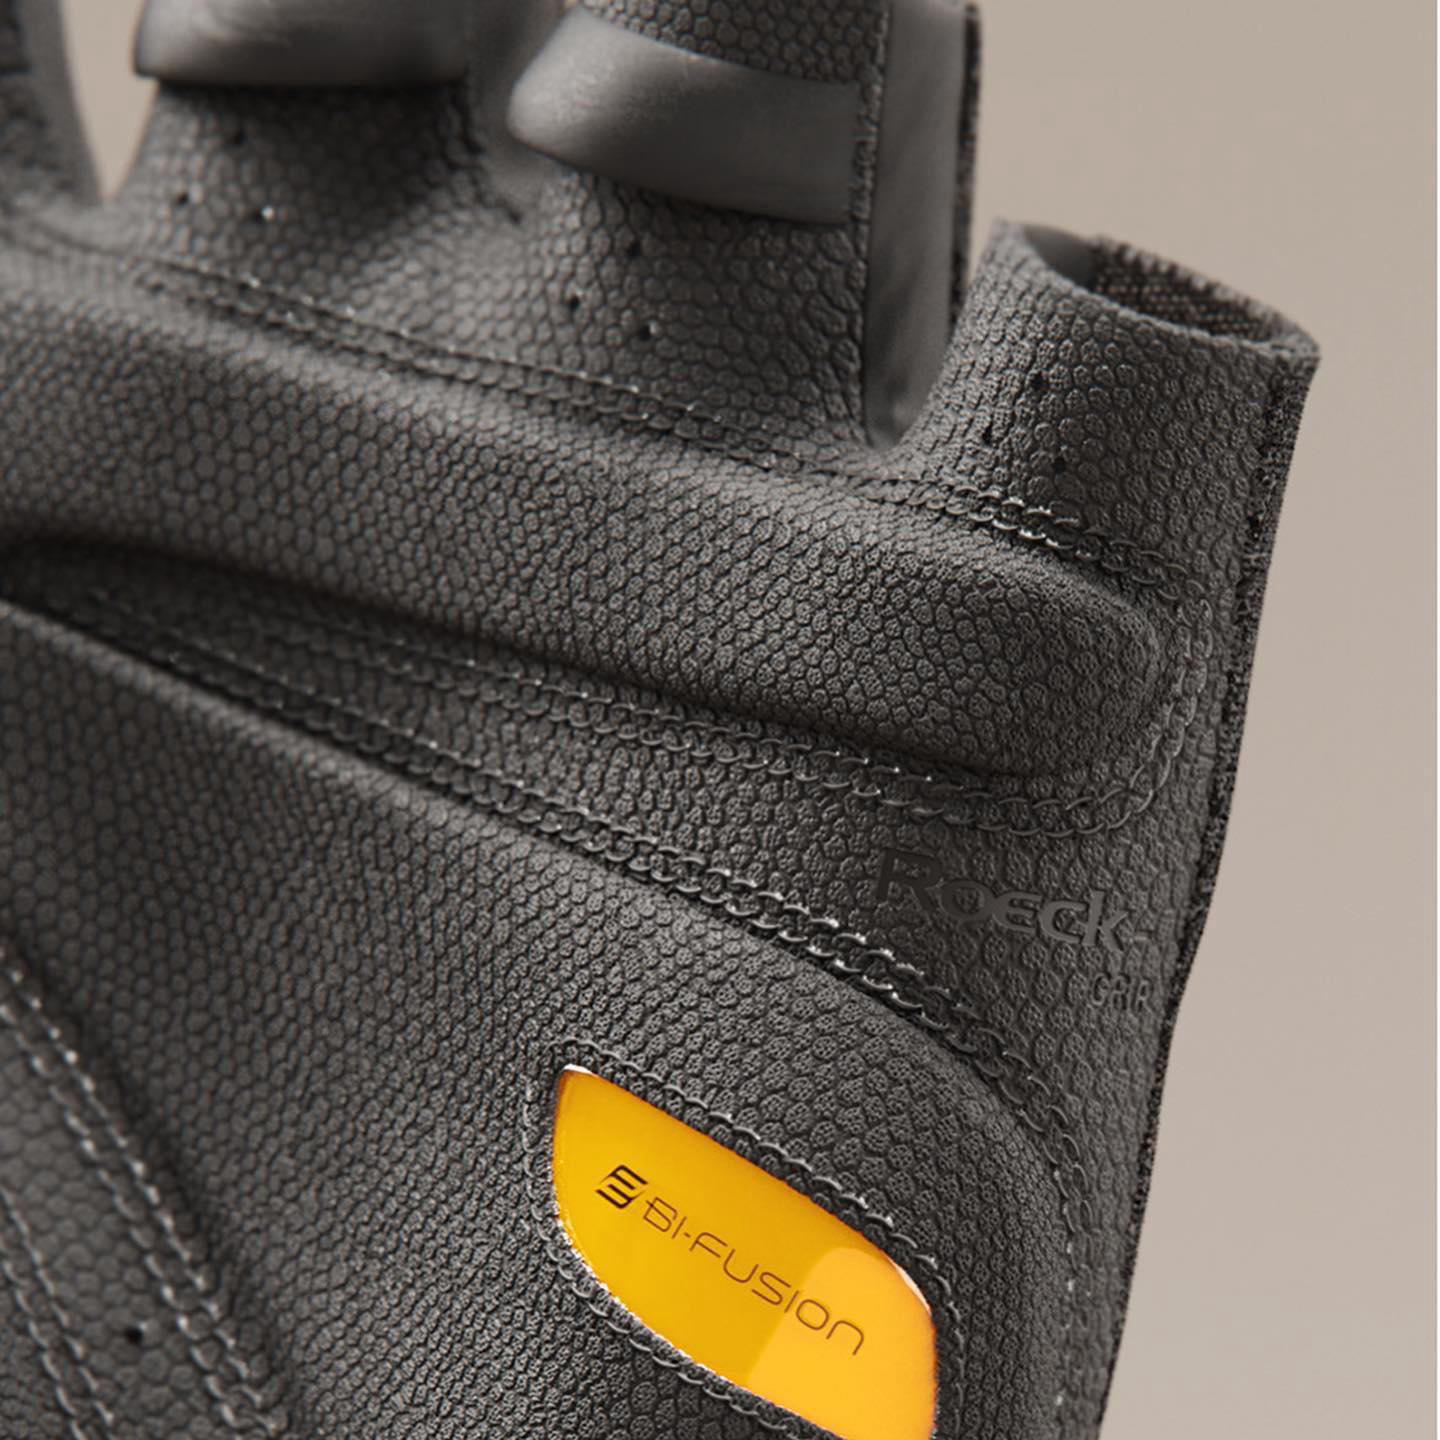 image  1 RenderShot - The high-end short-fingered glove is one of its kind when it comes to comfort and perfo